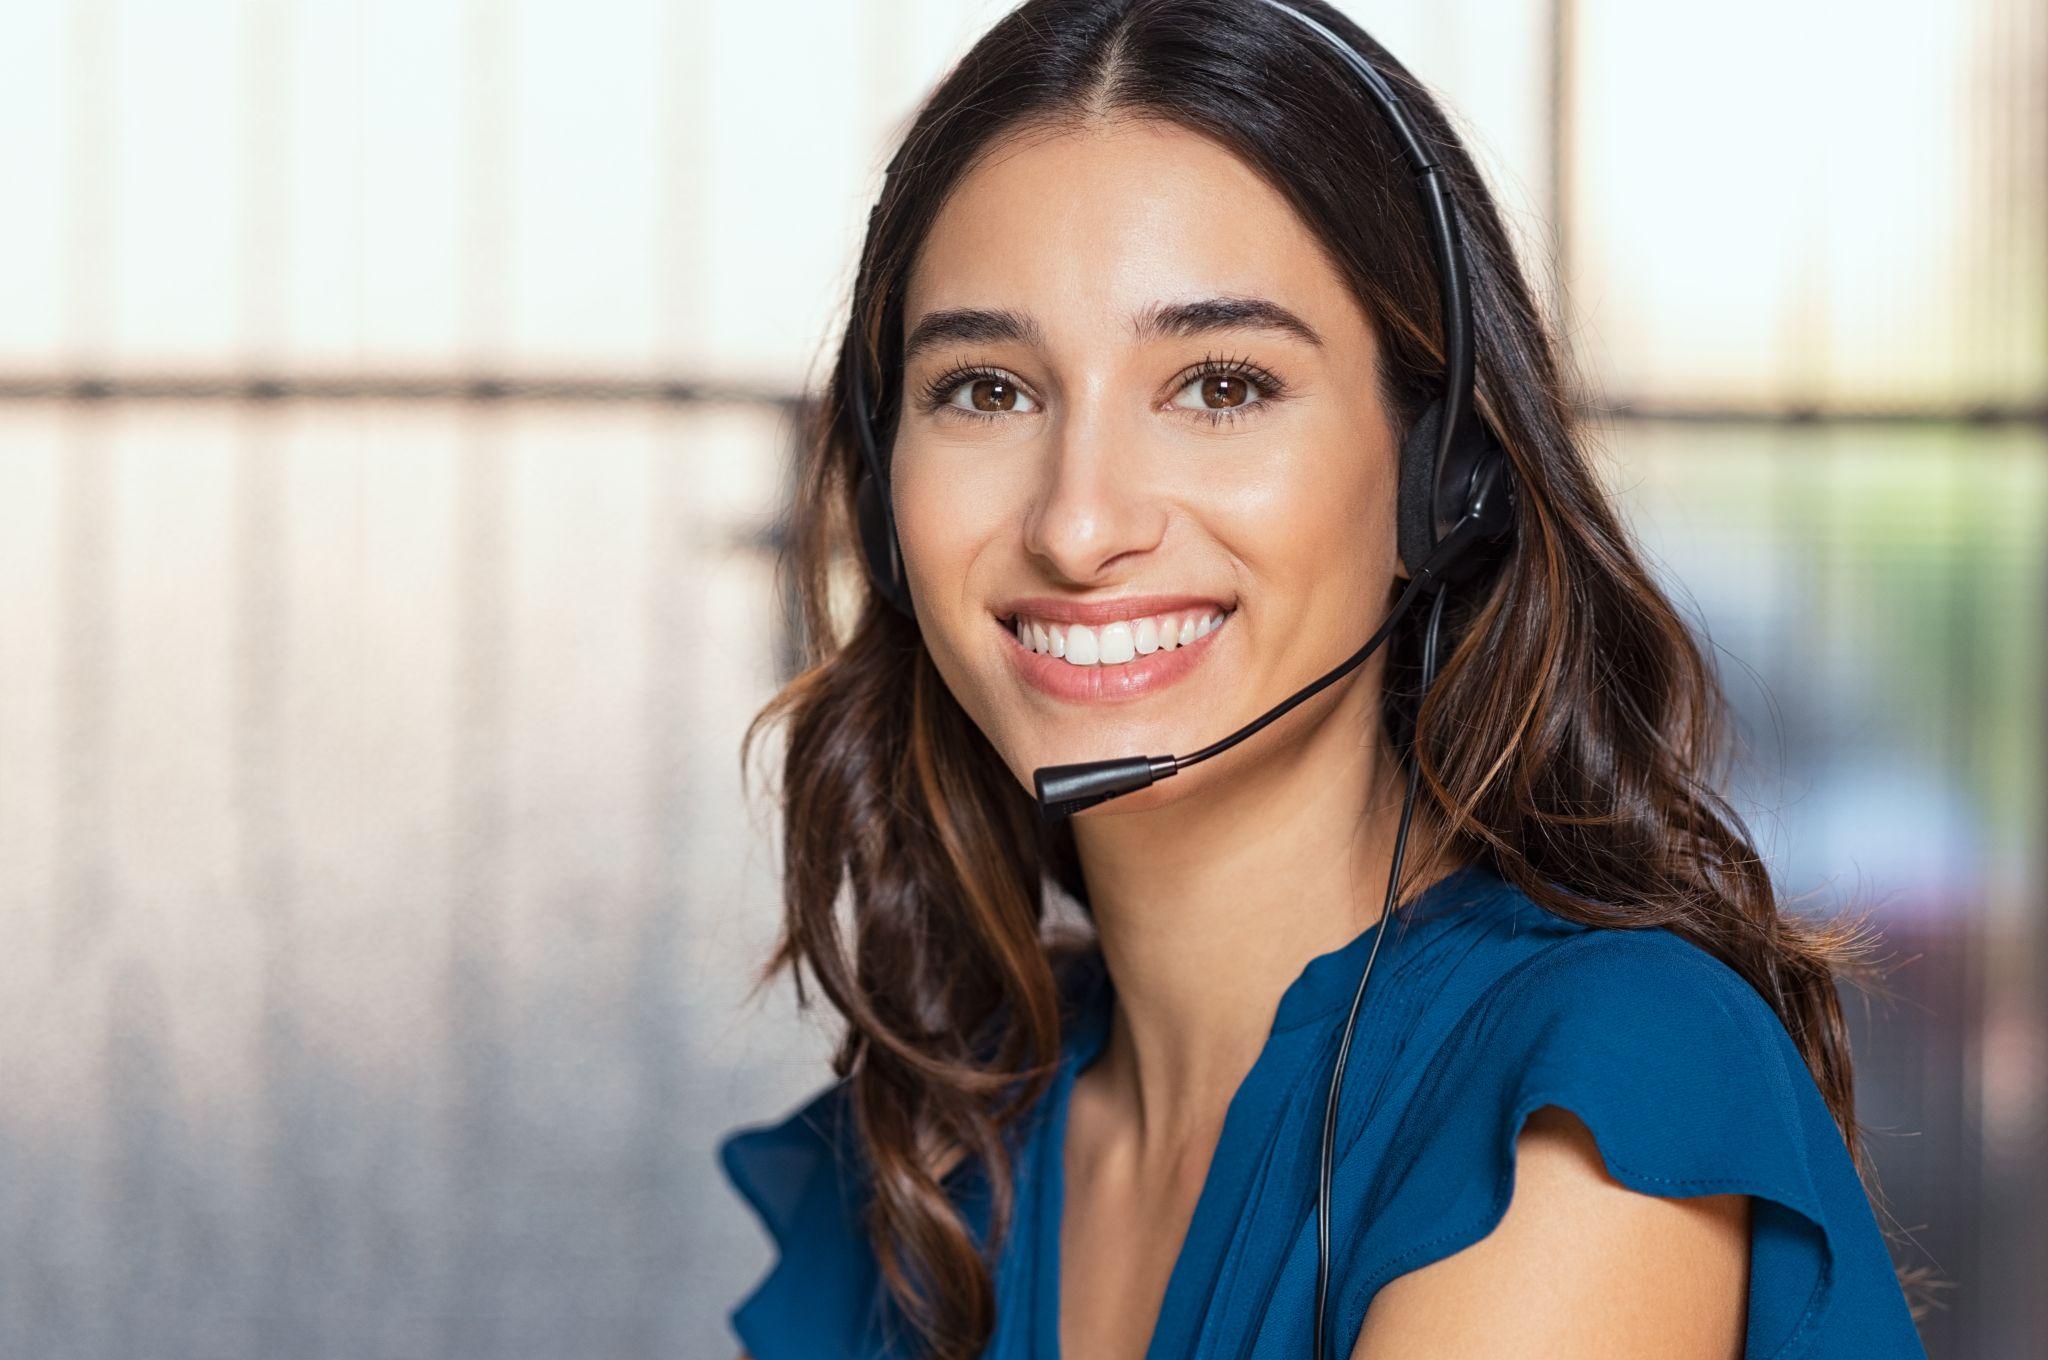 happy customer support phone operator at call center wearing headset